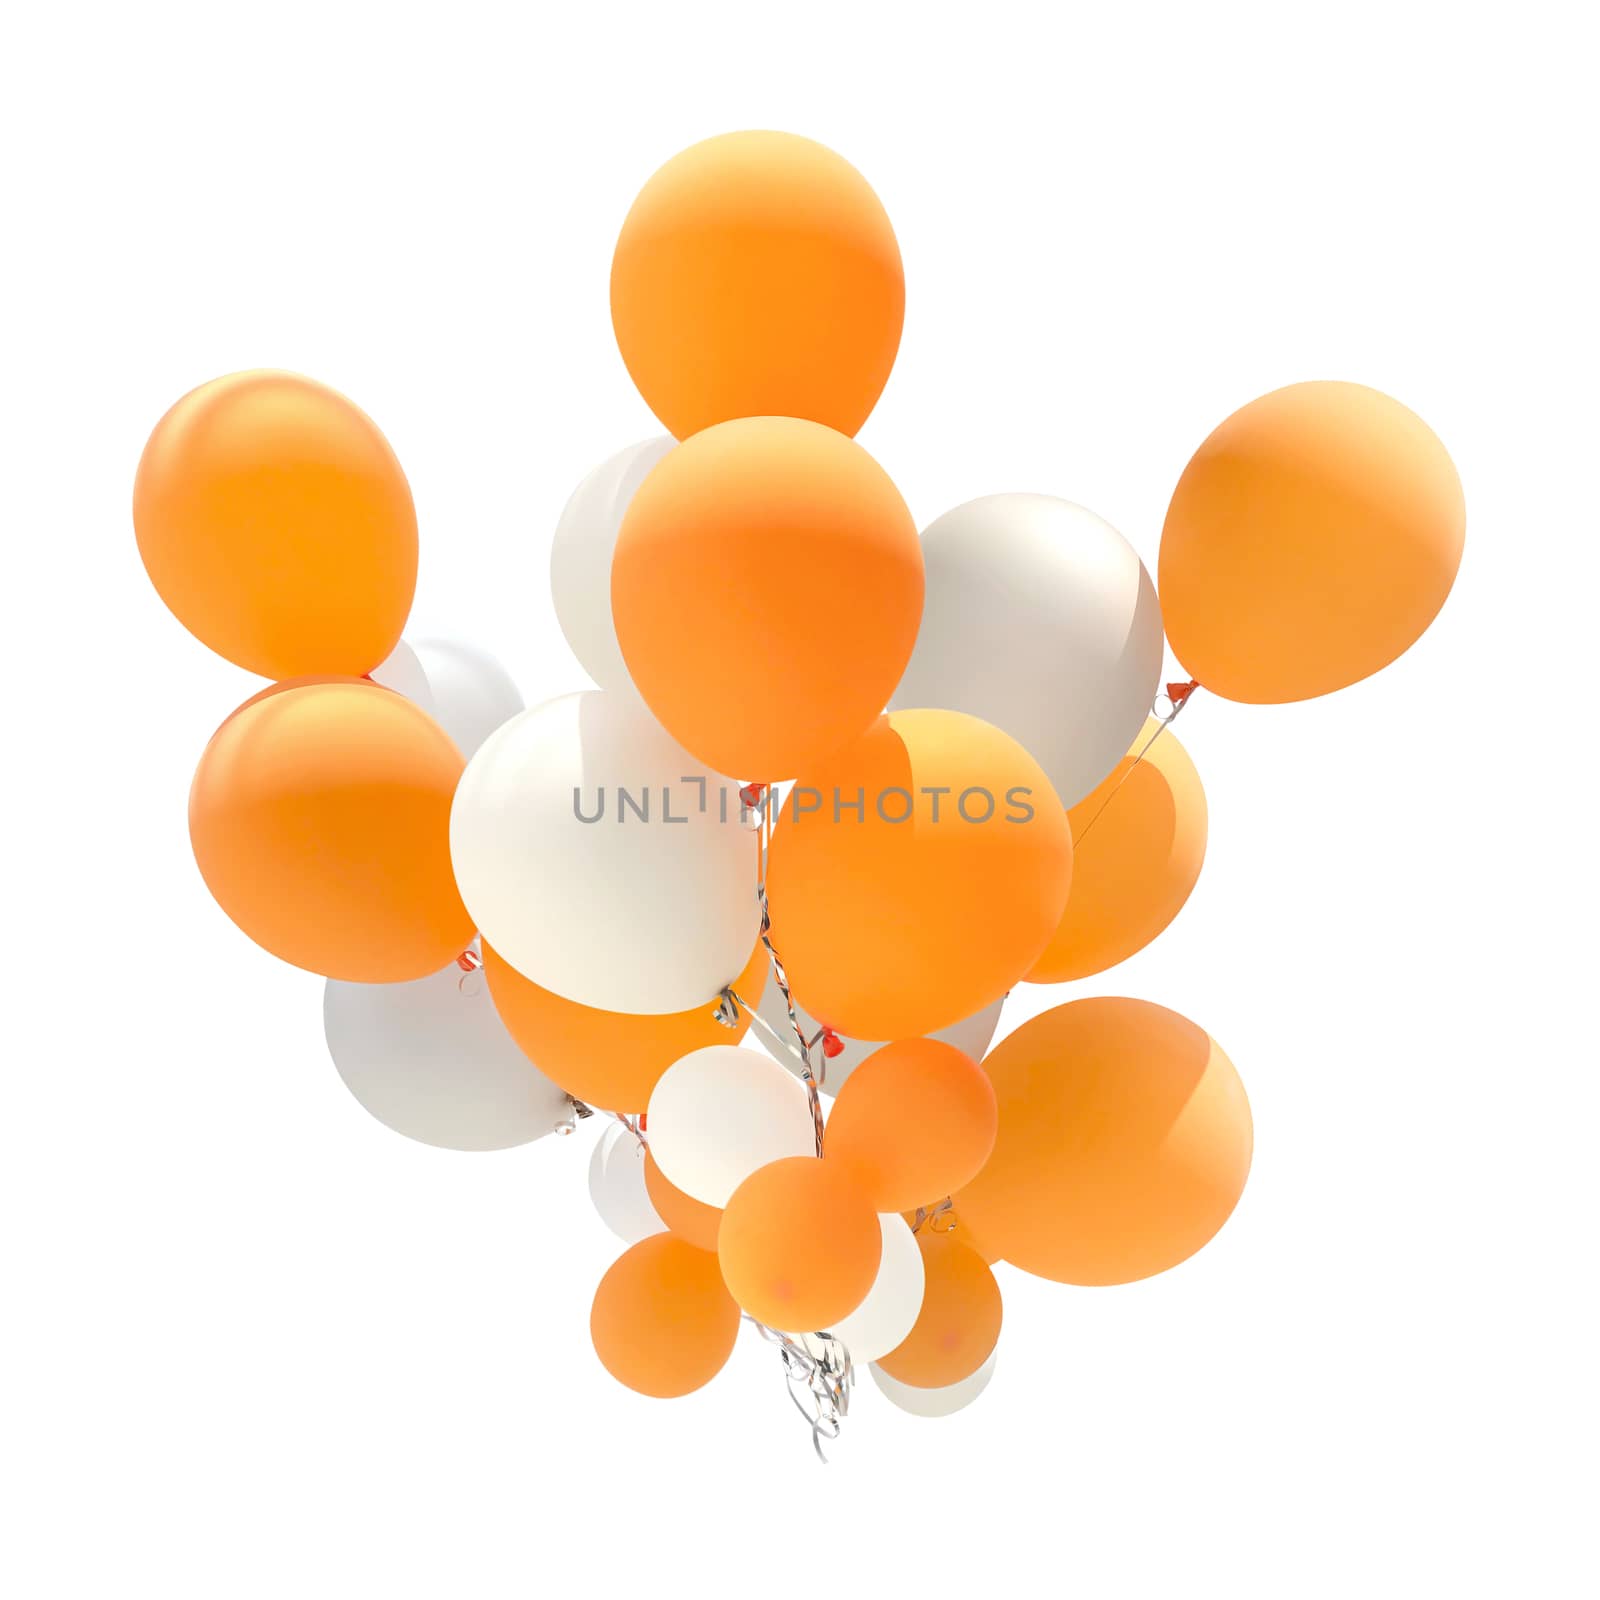 Group of orange and white color balloons for decoration in celebrations of various important days isolated on white background.